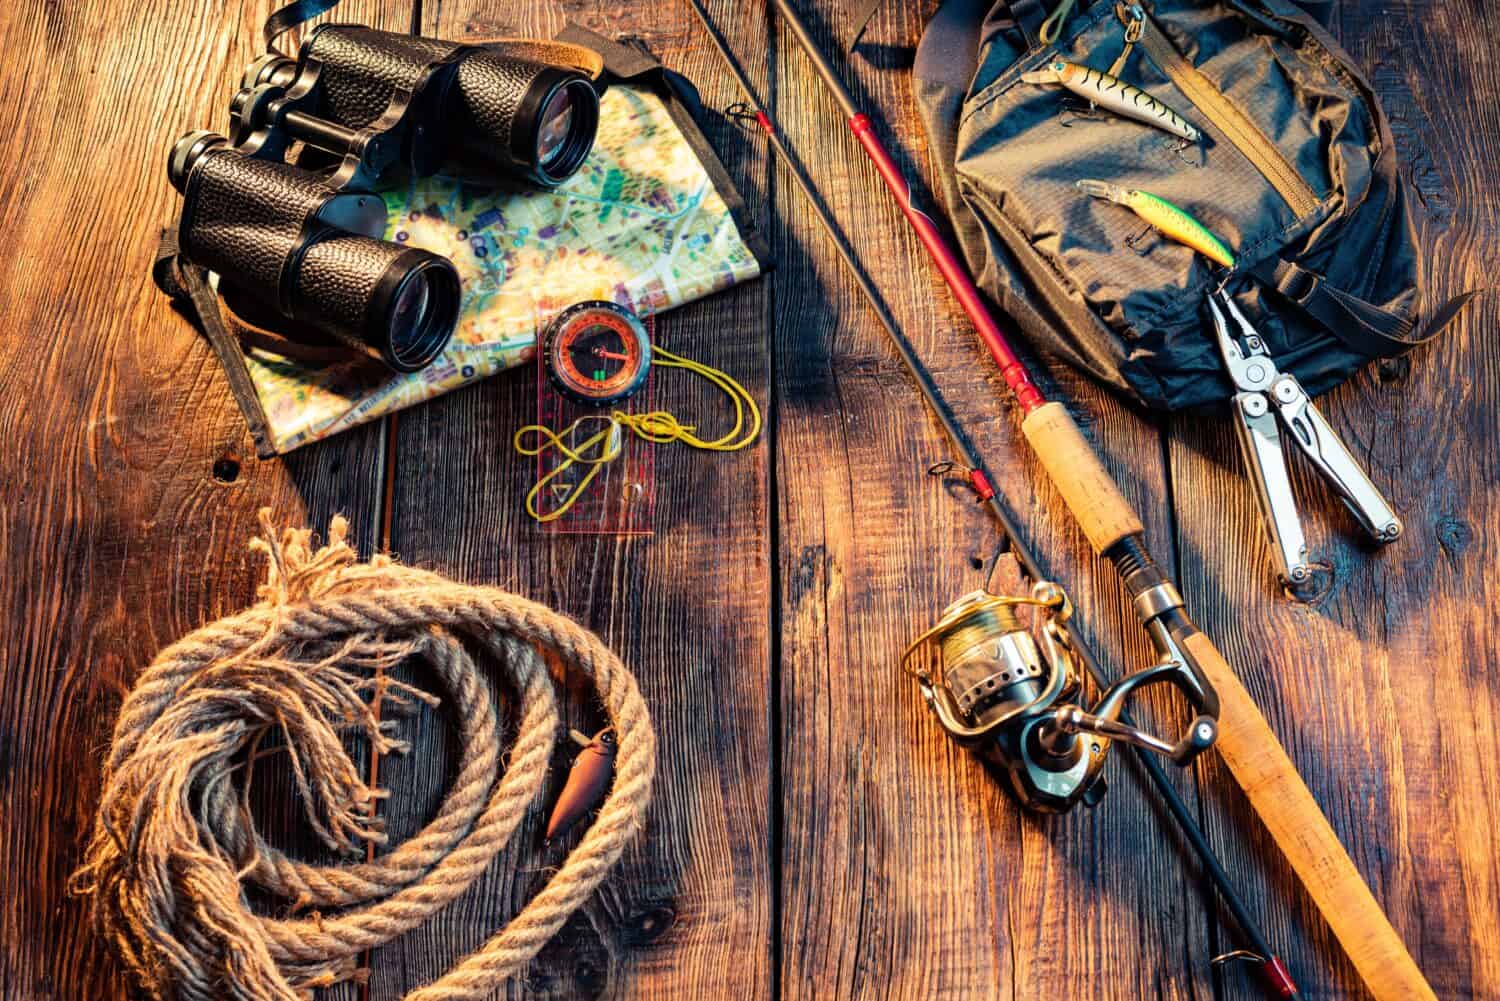 Fishing spinning with a reel line. Fishing items on a wooden background. Binoculars and rope. Copy space in centre.